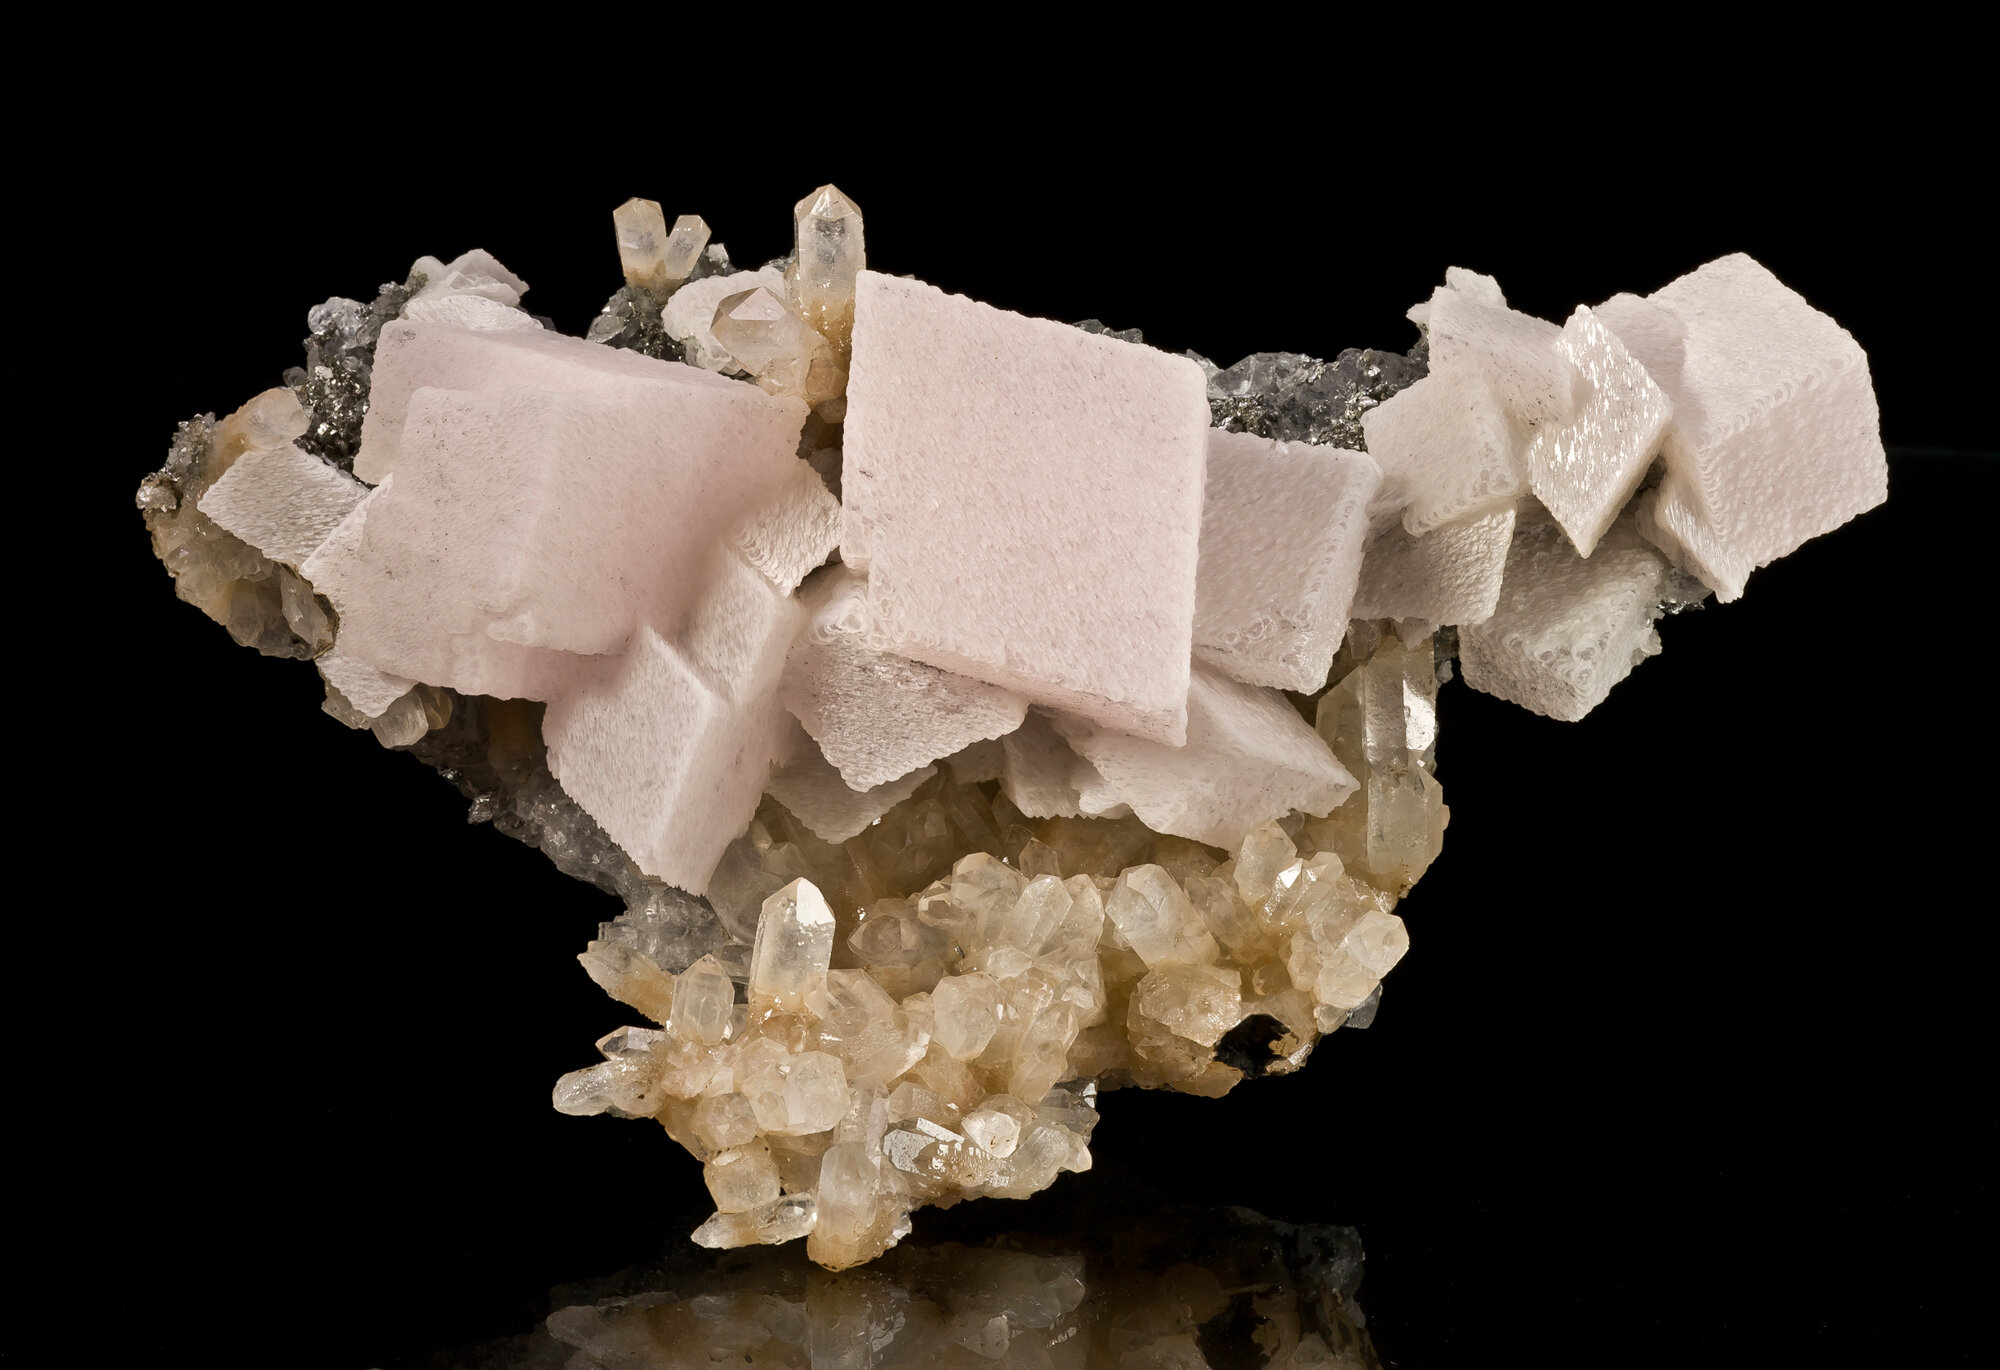  Calcite with quartz, 24 cm, from Huanggang mine No. 5, Keshiketeng County, Chifeng Prefecture, Inner Mongolia Autonomous Region, China. Found in 2011. 